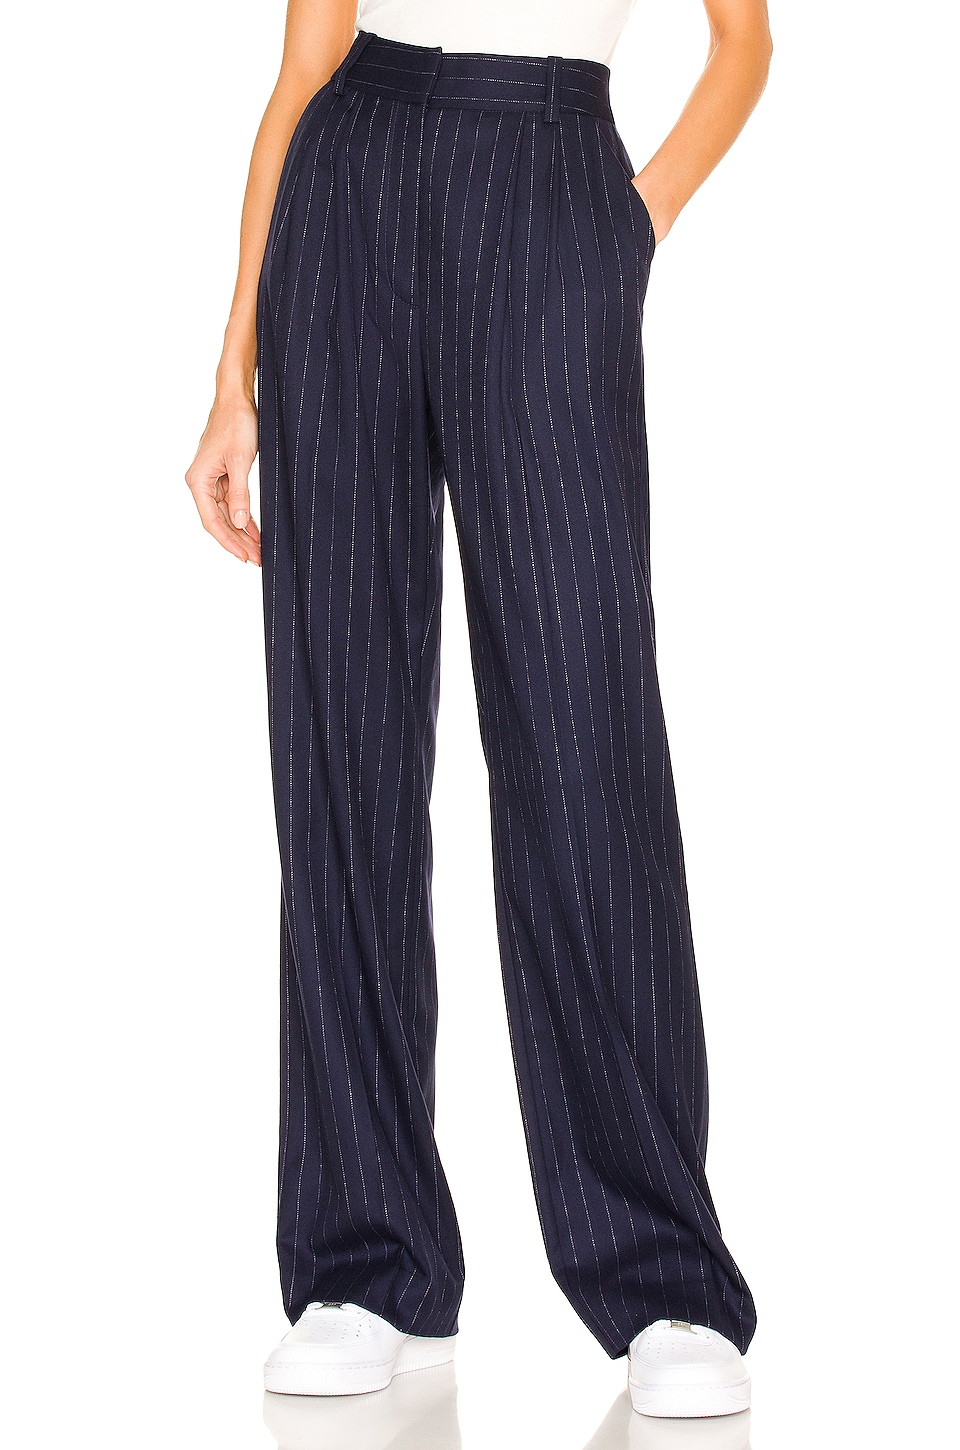 Image 1 of The Favorite Pant in Navy Pinstripe